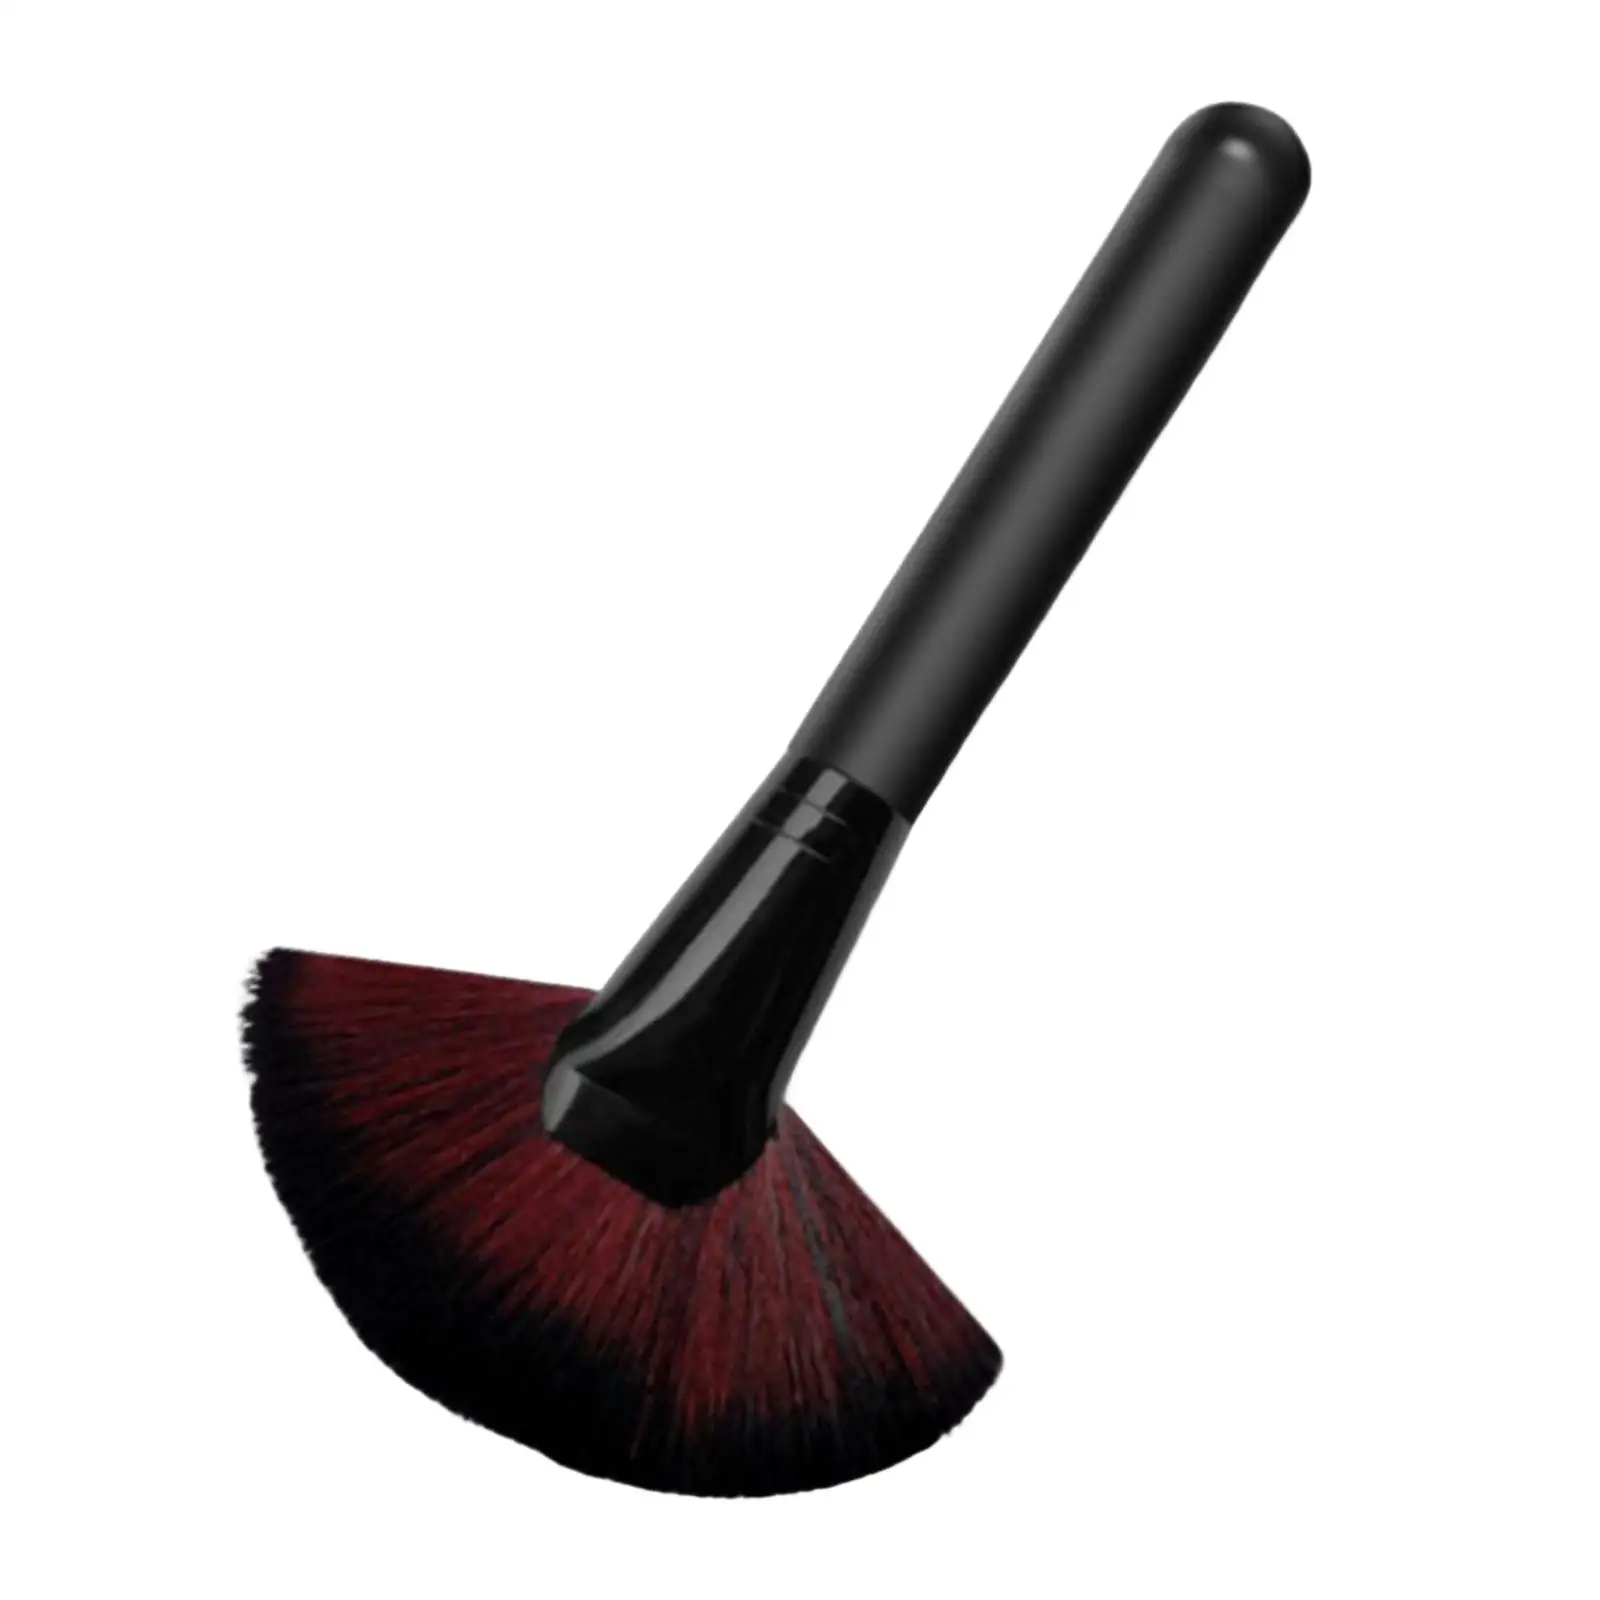 Model Cleaning Brush Hobby Model Dusting Brush Soft Anti Falling Hair for Electronic Devices, Figurines, Keyboards